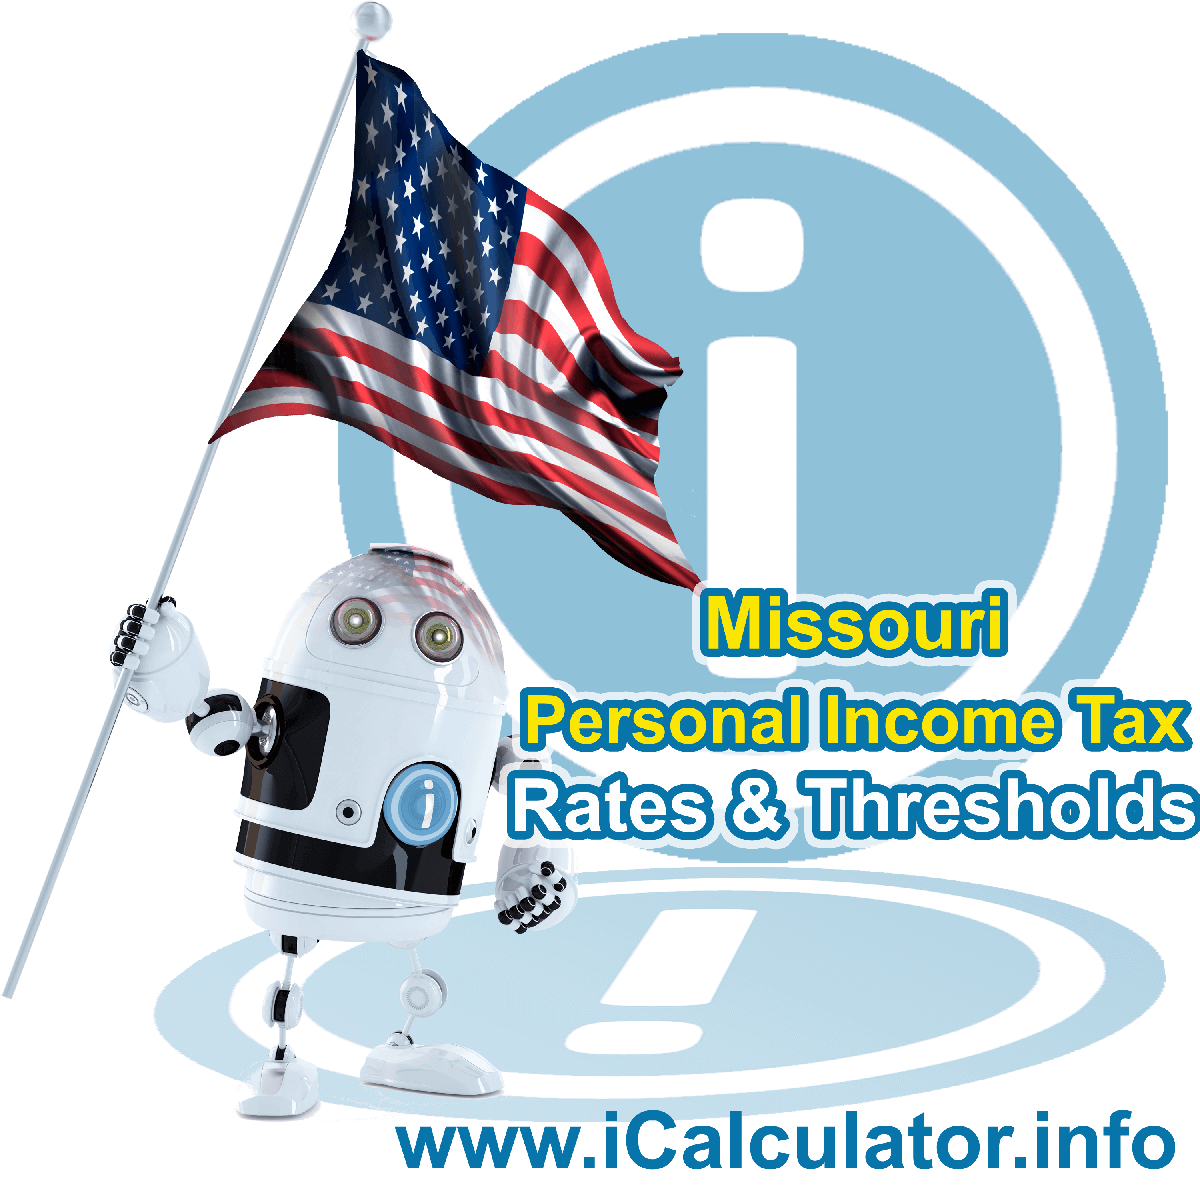 Missouri State Tax Tables 2017. This image displays details of the Missouri State Tax Tables for the 2017 tax return year which is provided in support of the 2017 US Tax Calculator